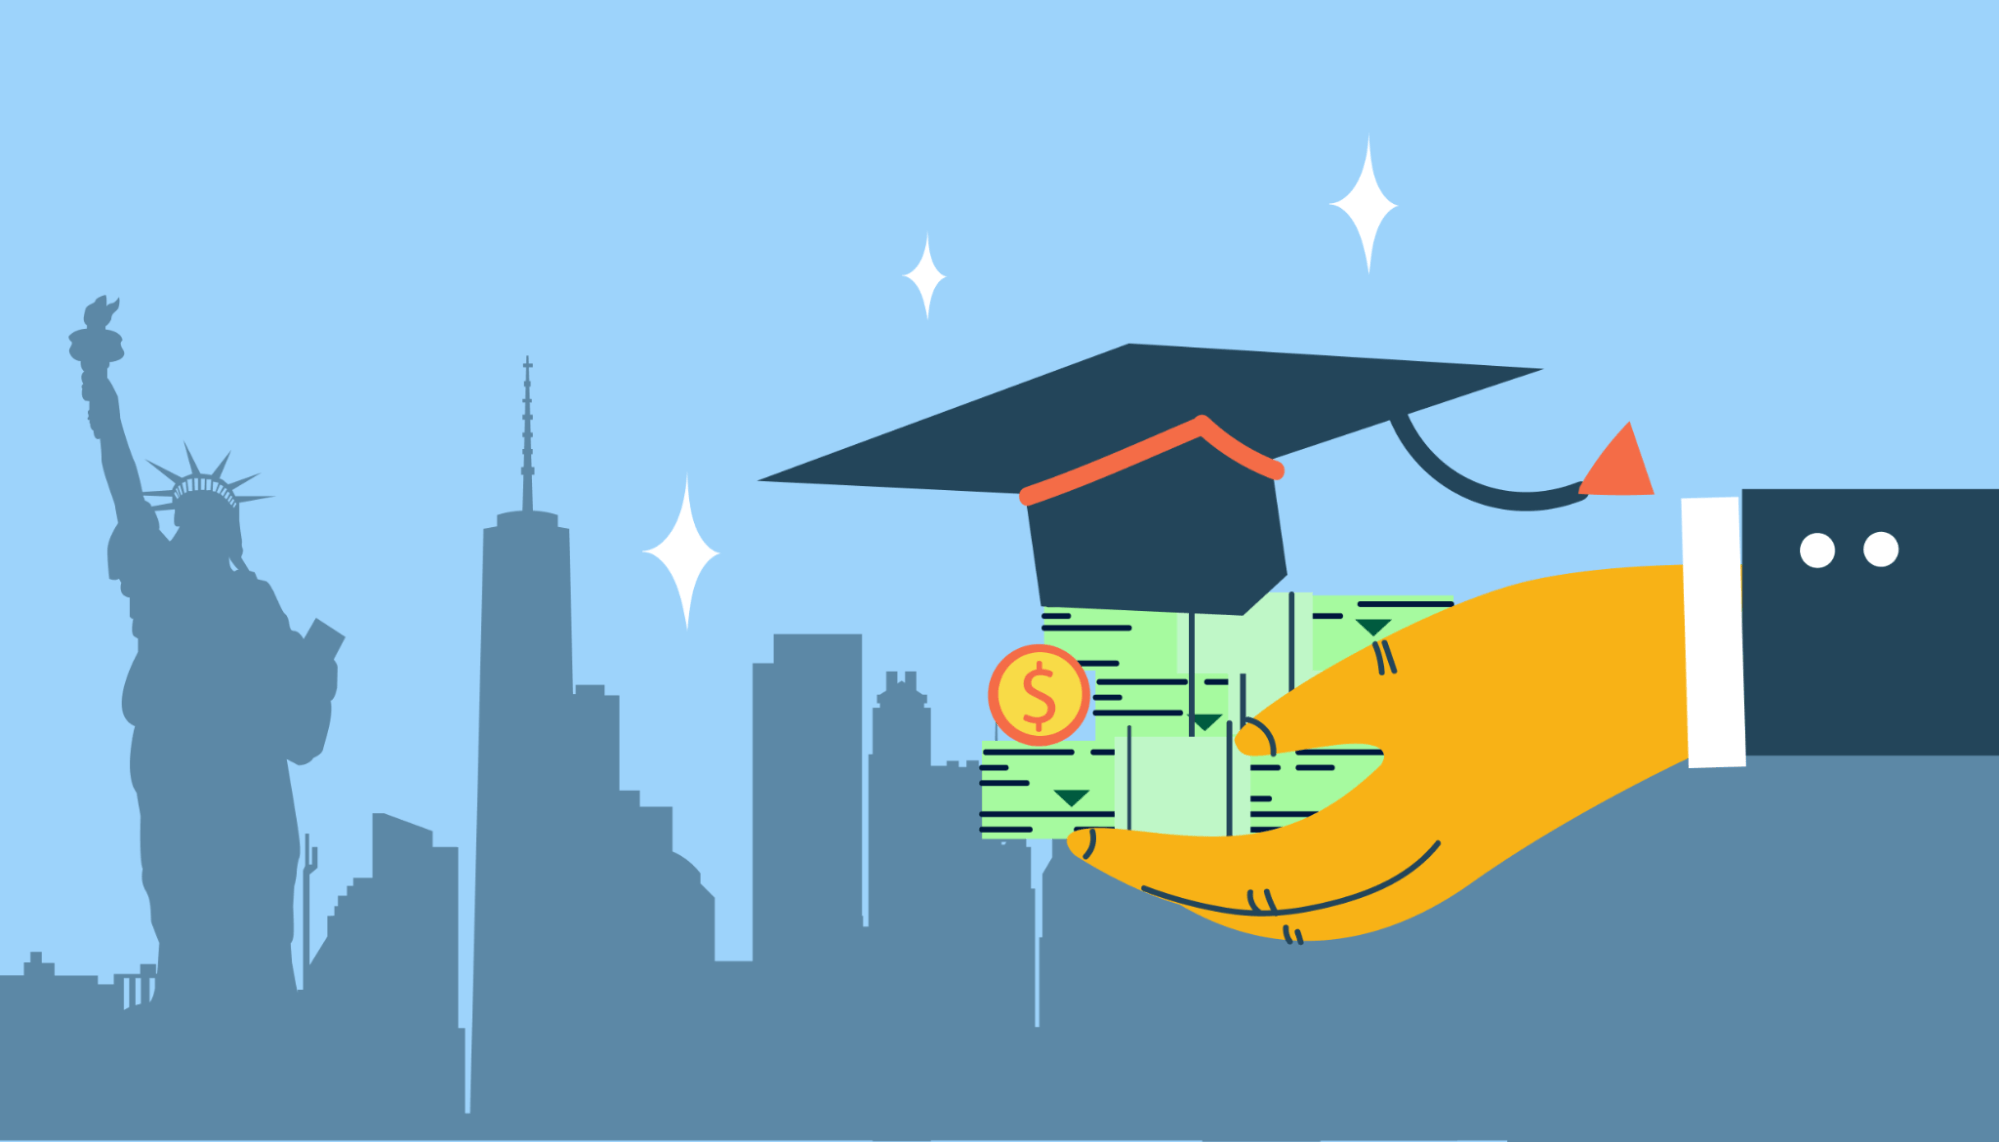 The complete guide to TAP financial aid for NYS students